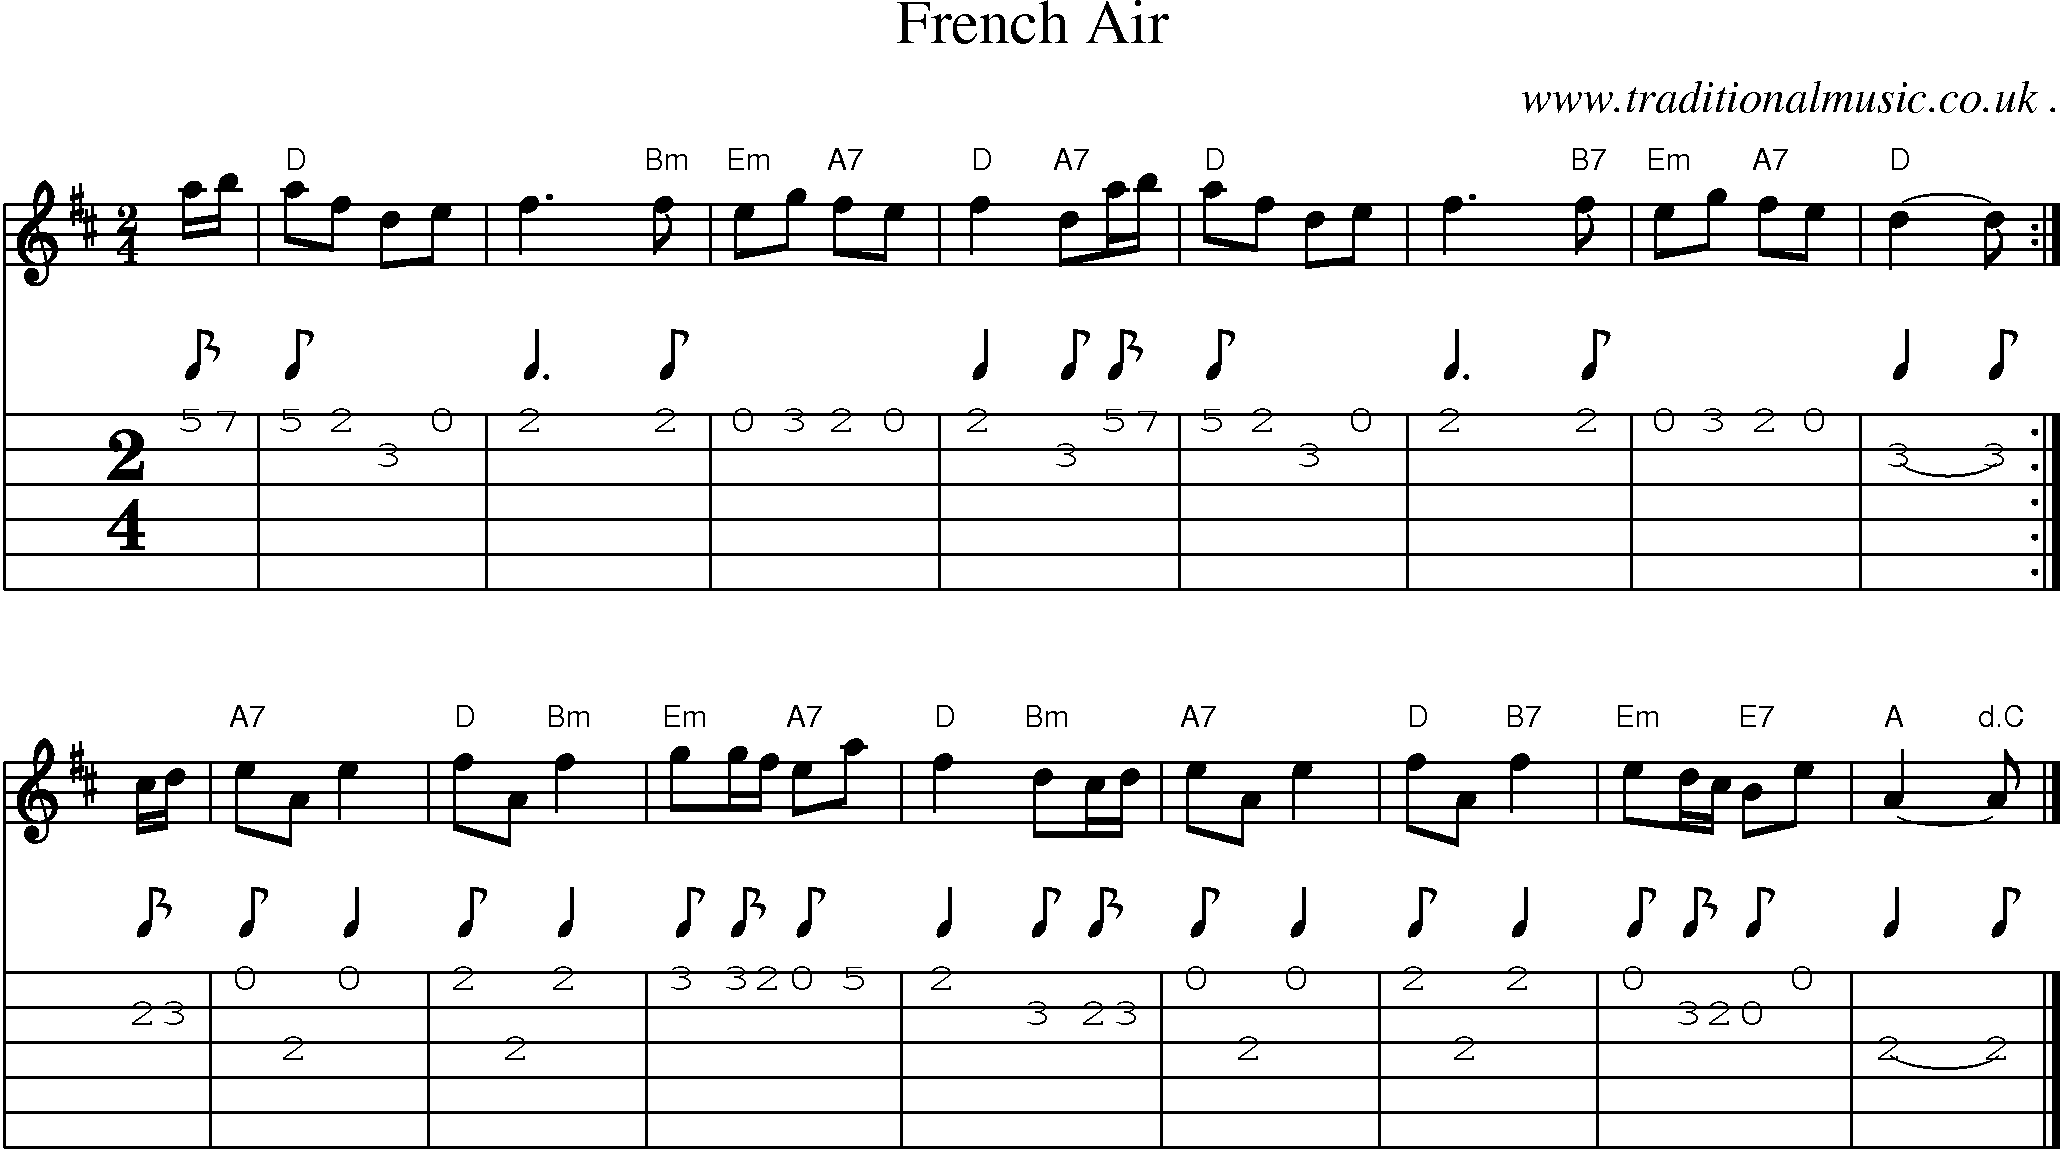 Sheet-music  score, Chords and Guitar Tabs for French Air